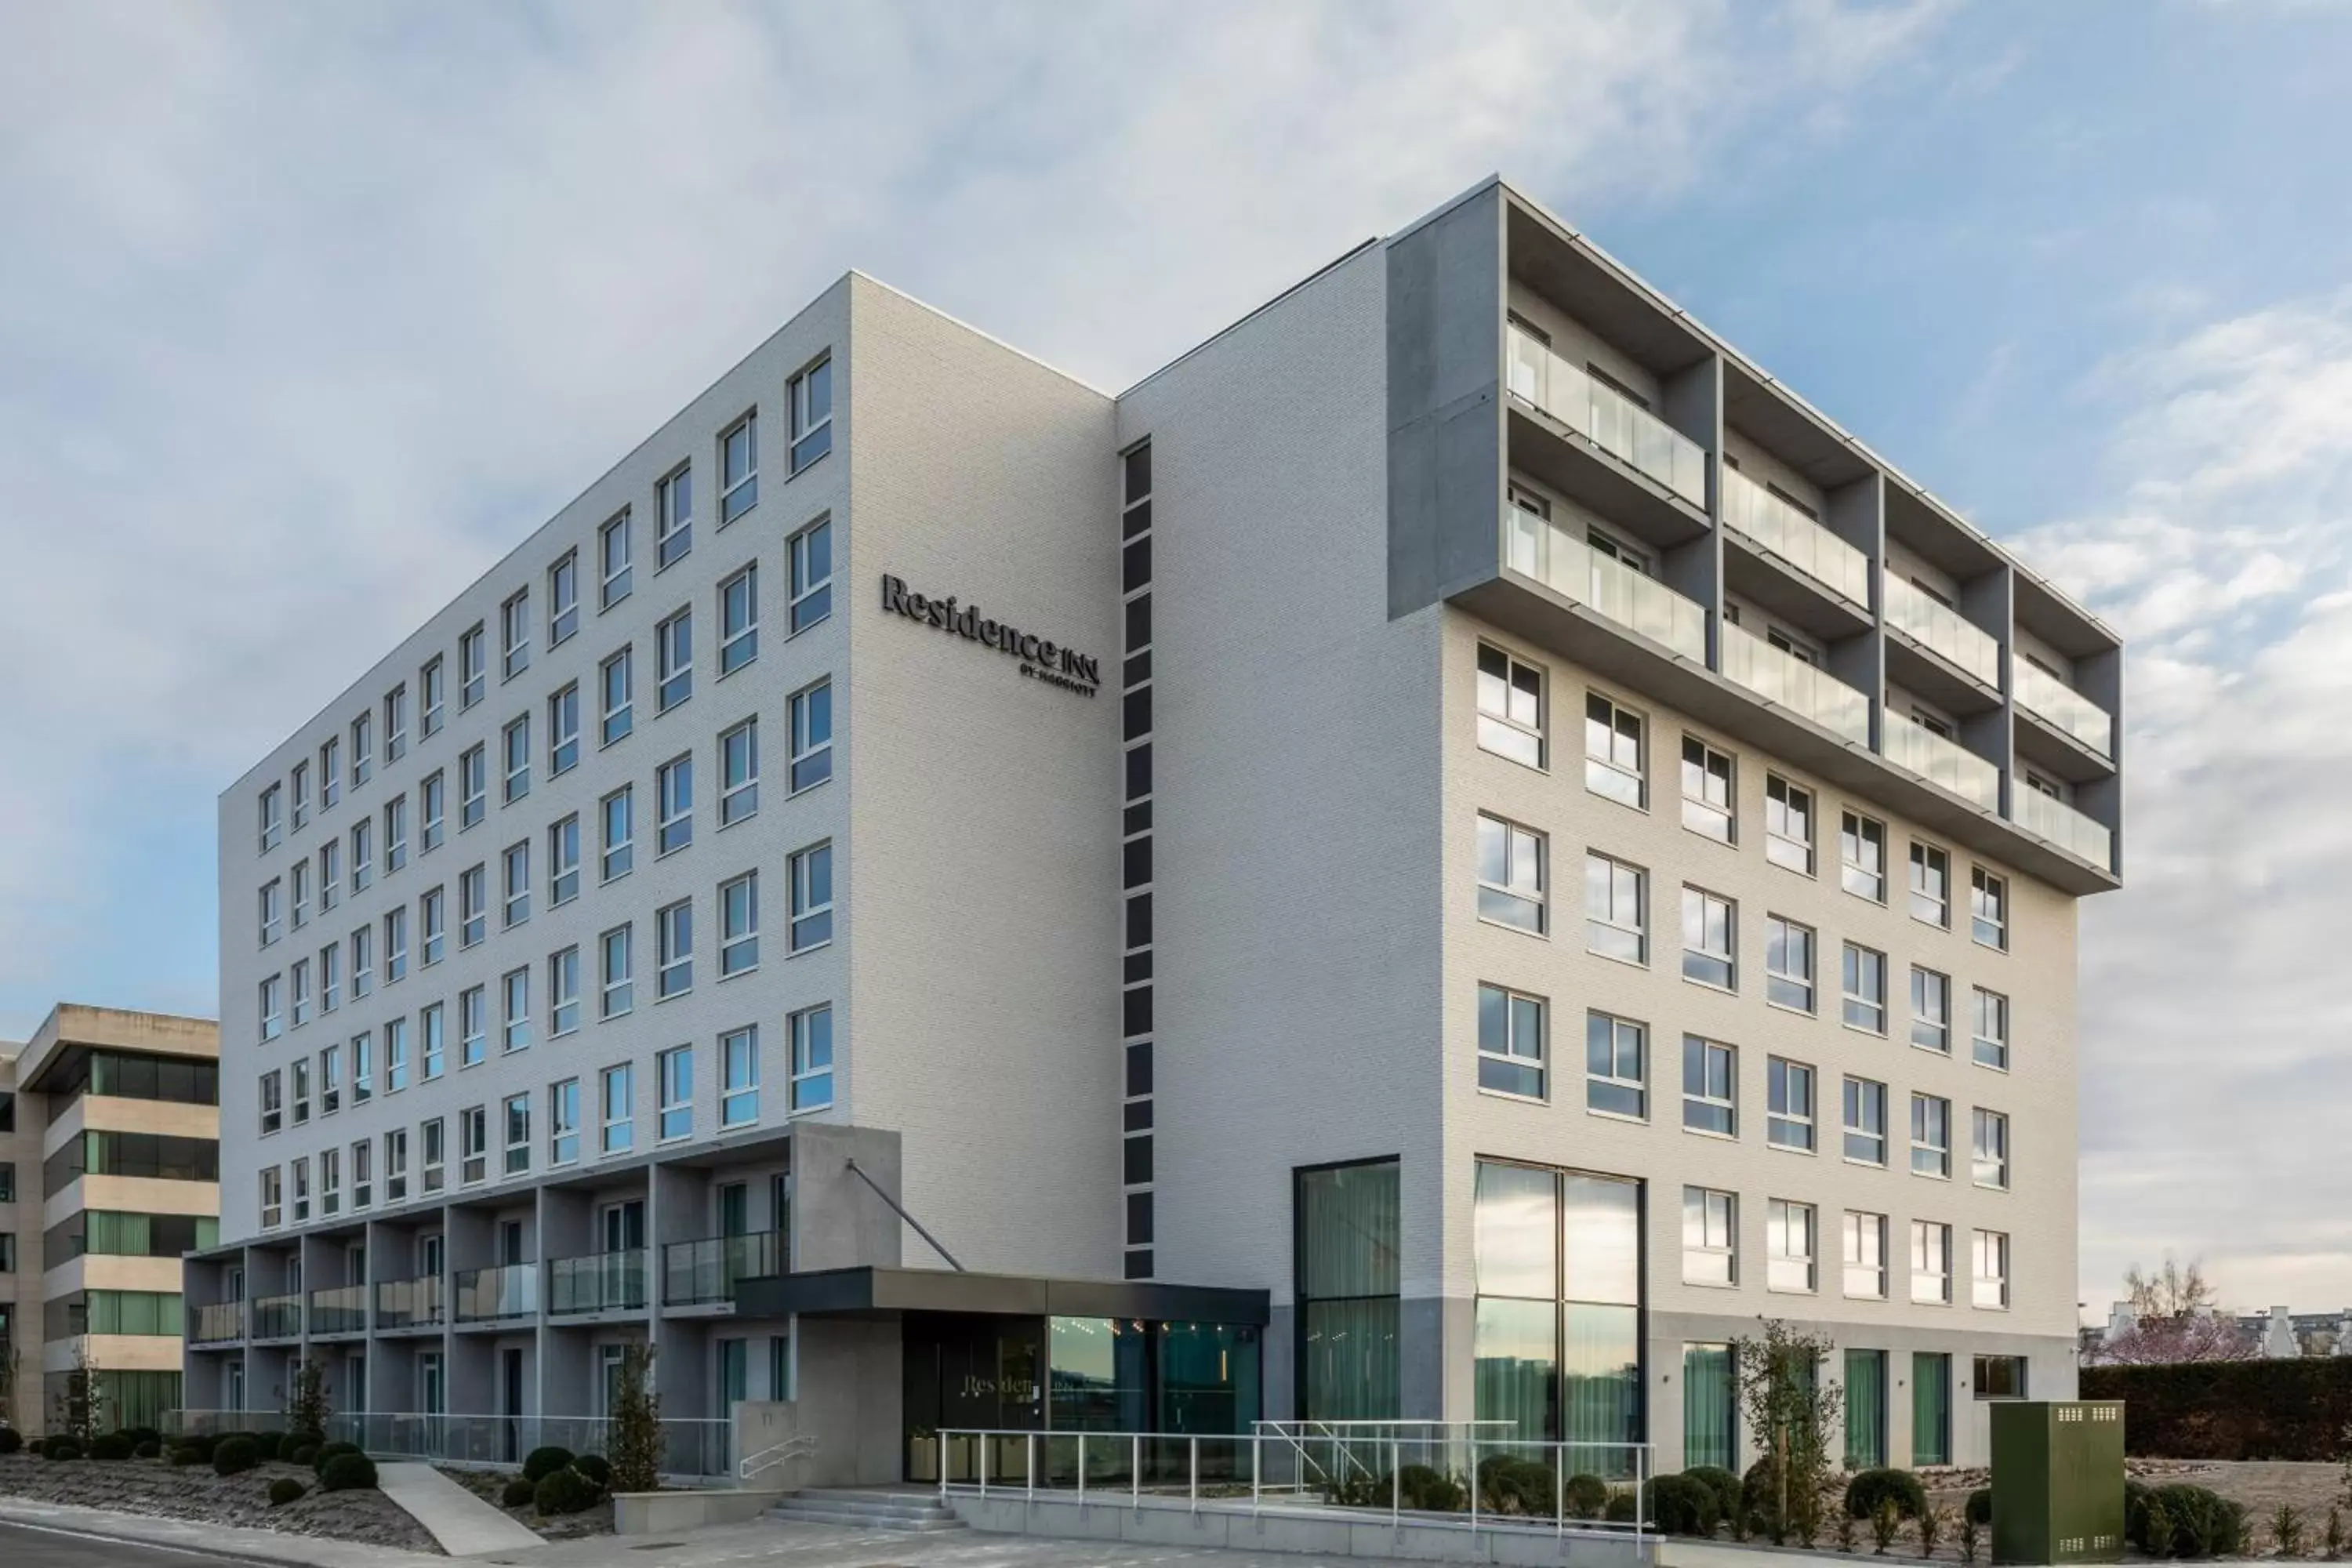 Property Building in Residence Inn by Marriott Brussels Airport